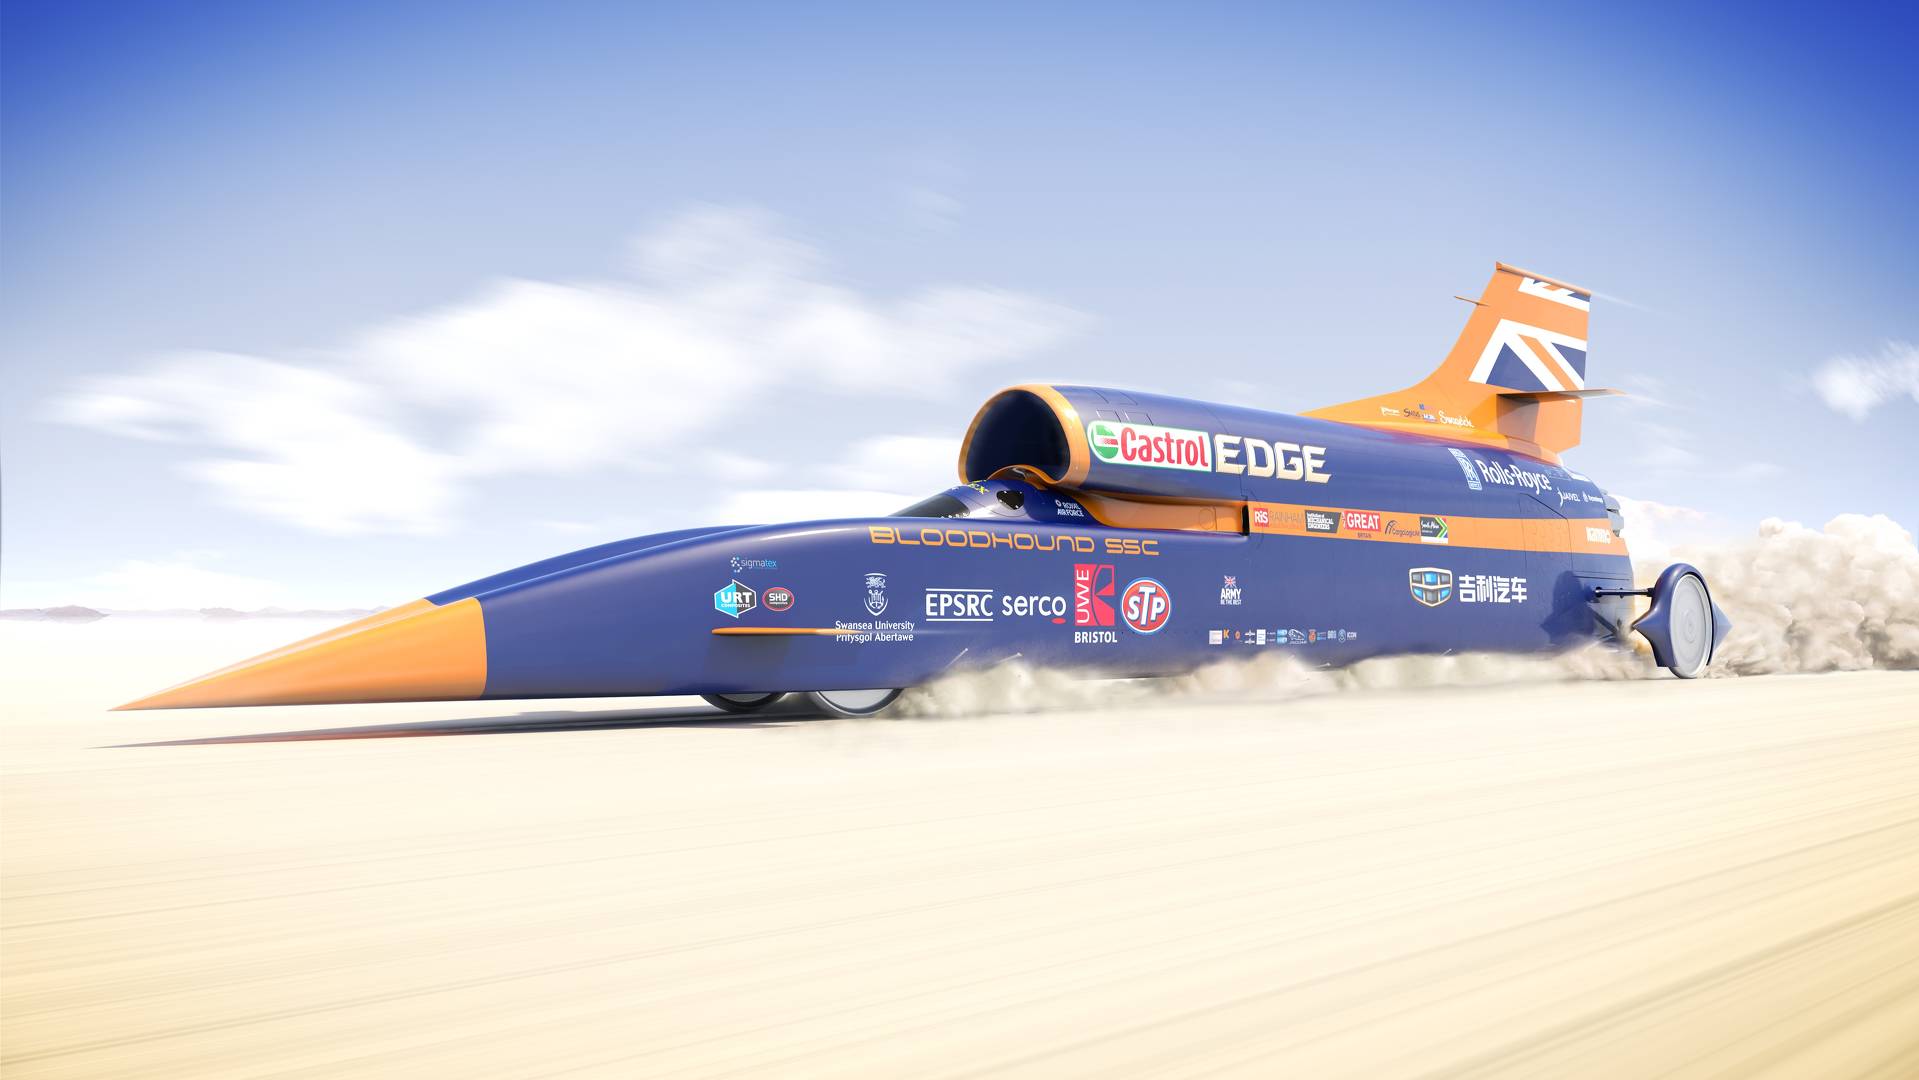 Bloodhound land speed record project enters administration